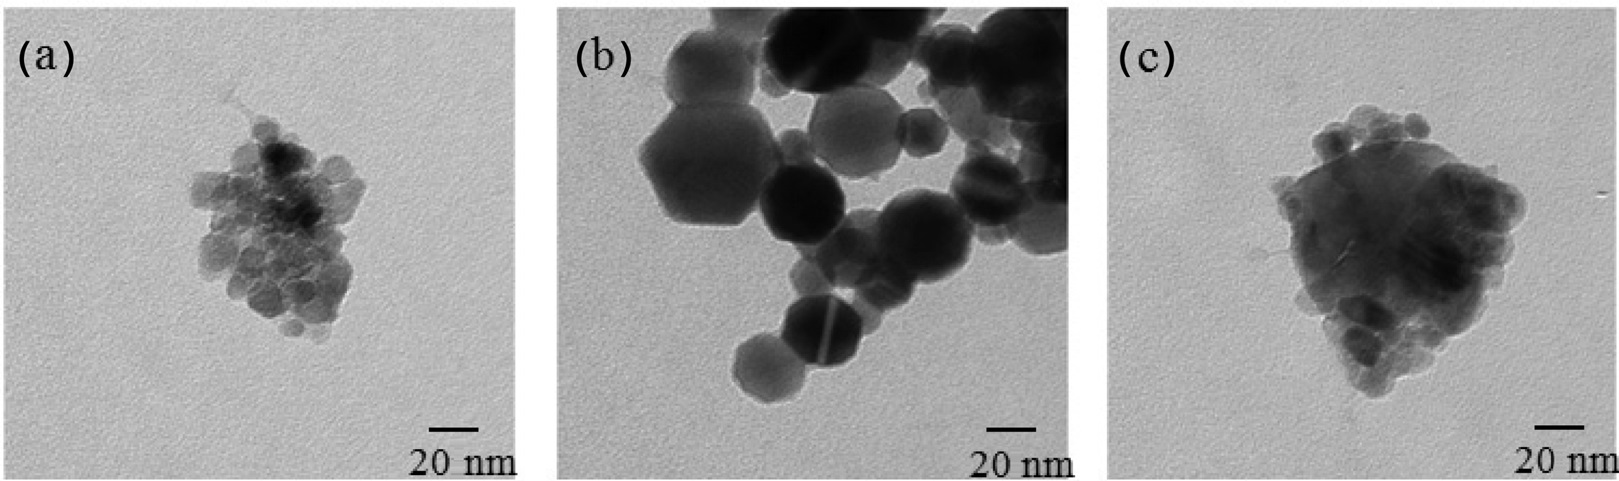 The TEM images of TiO2 particles obtained according to calcination temperatures, (a) 500 ℃, (b) 600 ℃, (c) 800 ℃.